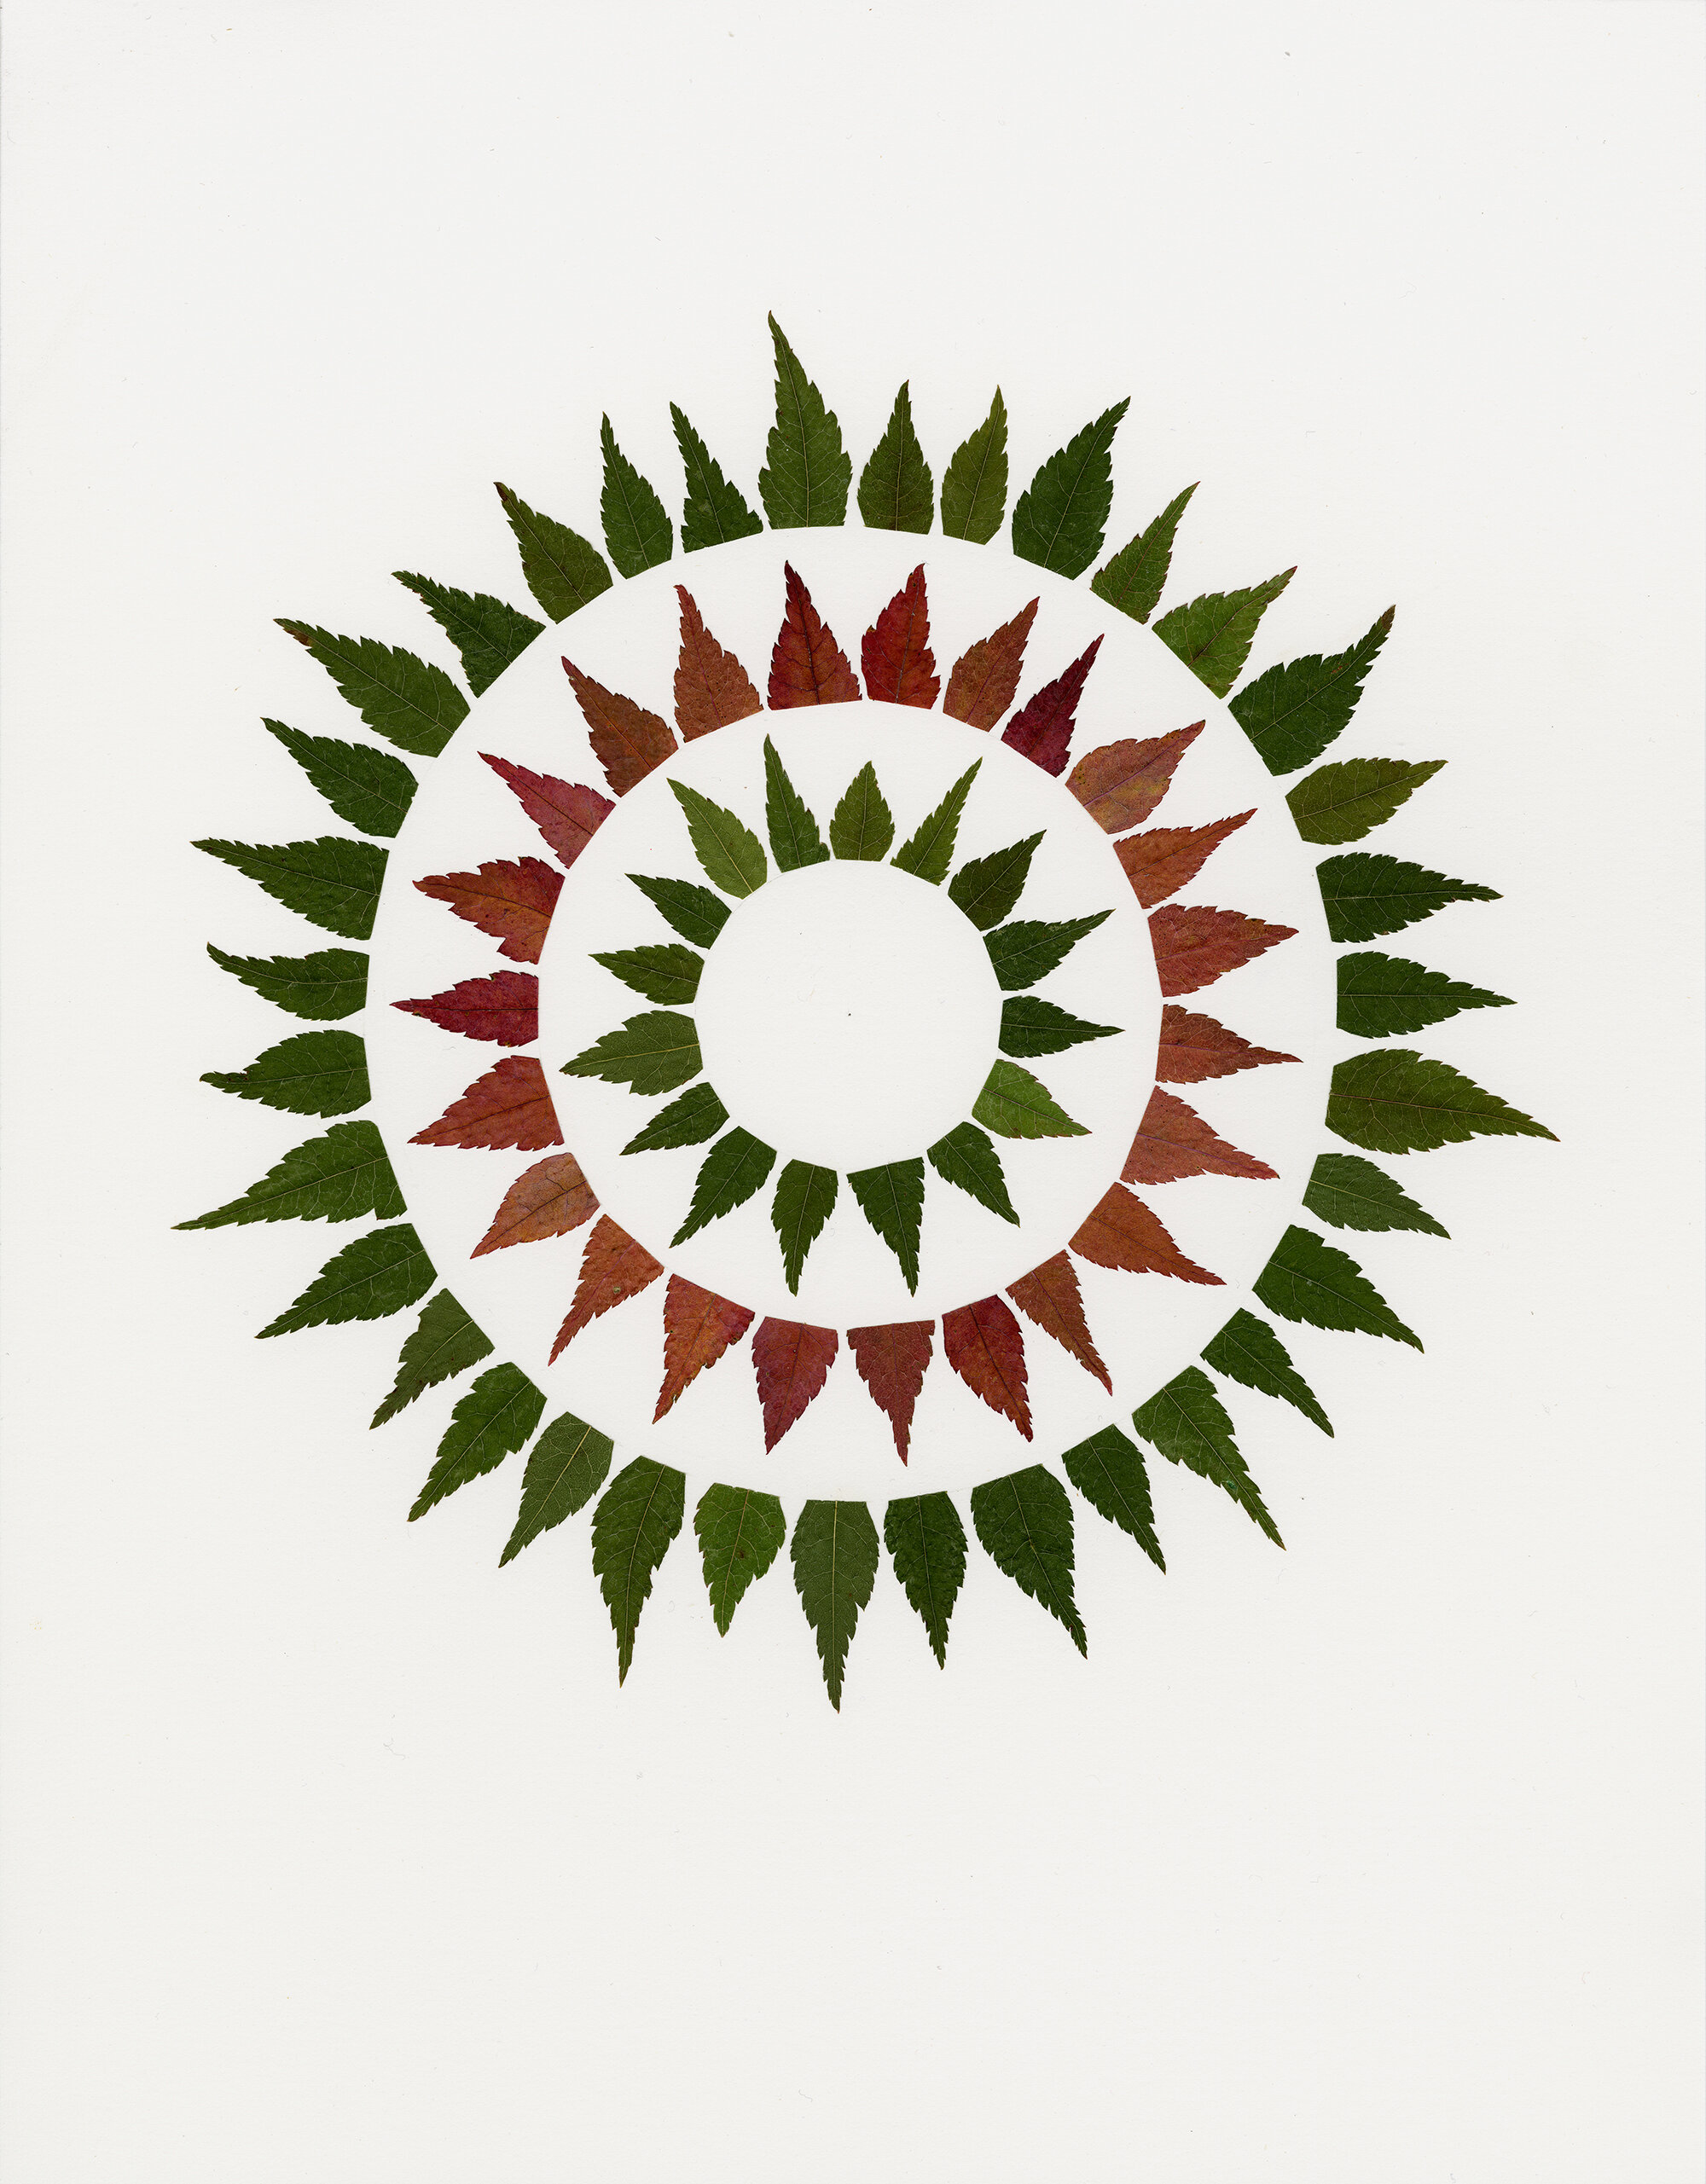  Linda Stillman  Circle Out,  2020  Leaves on paper  14 x 11 inches  Framed  